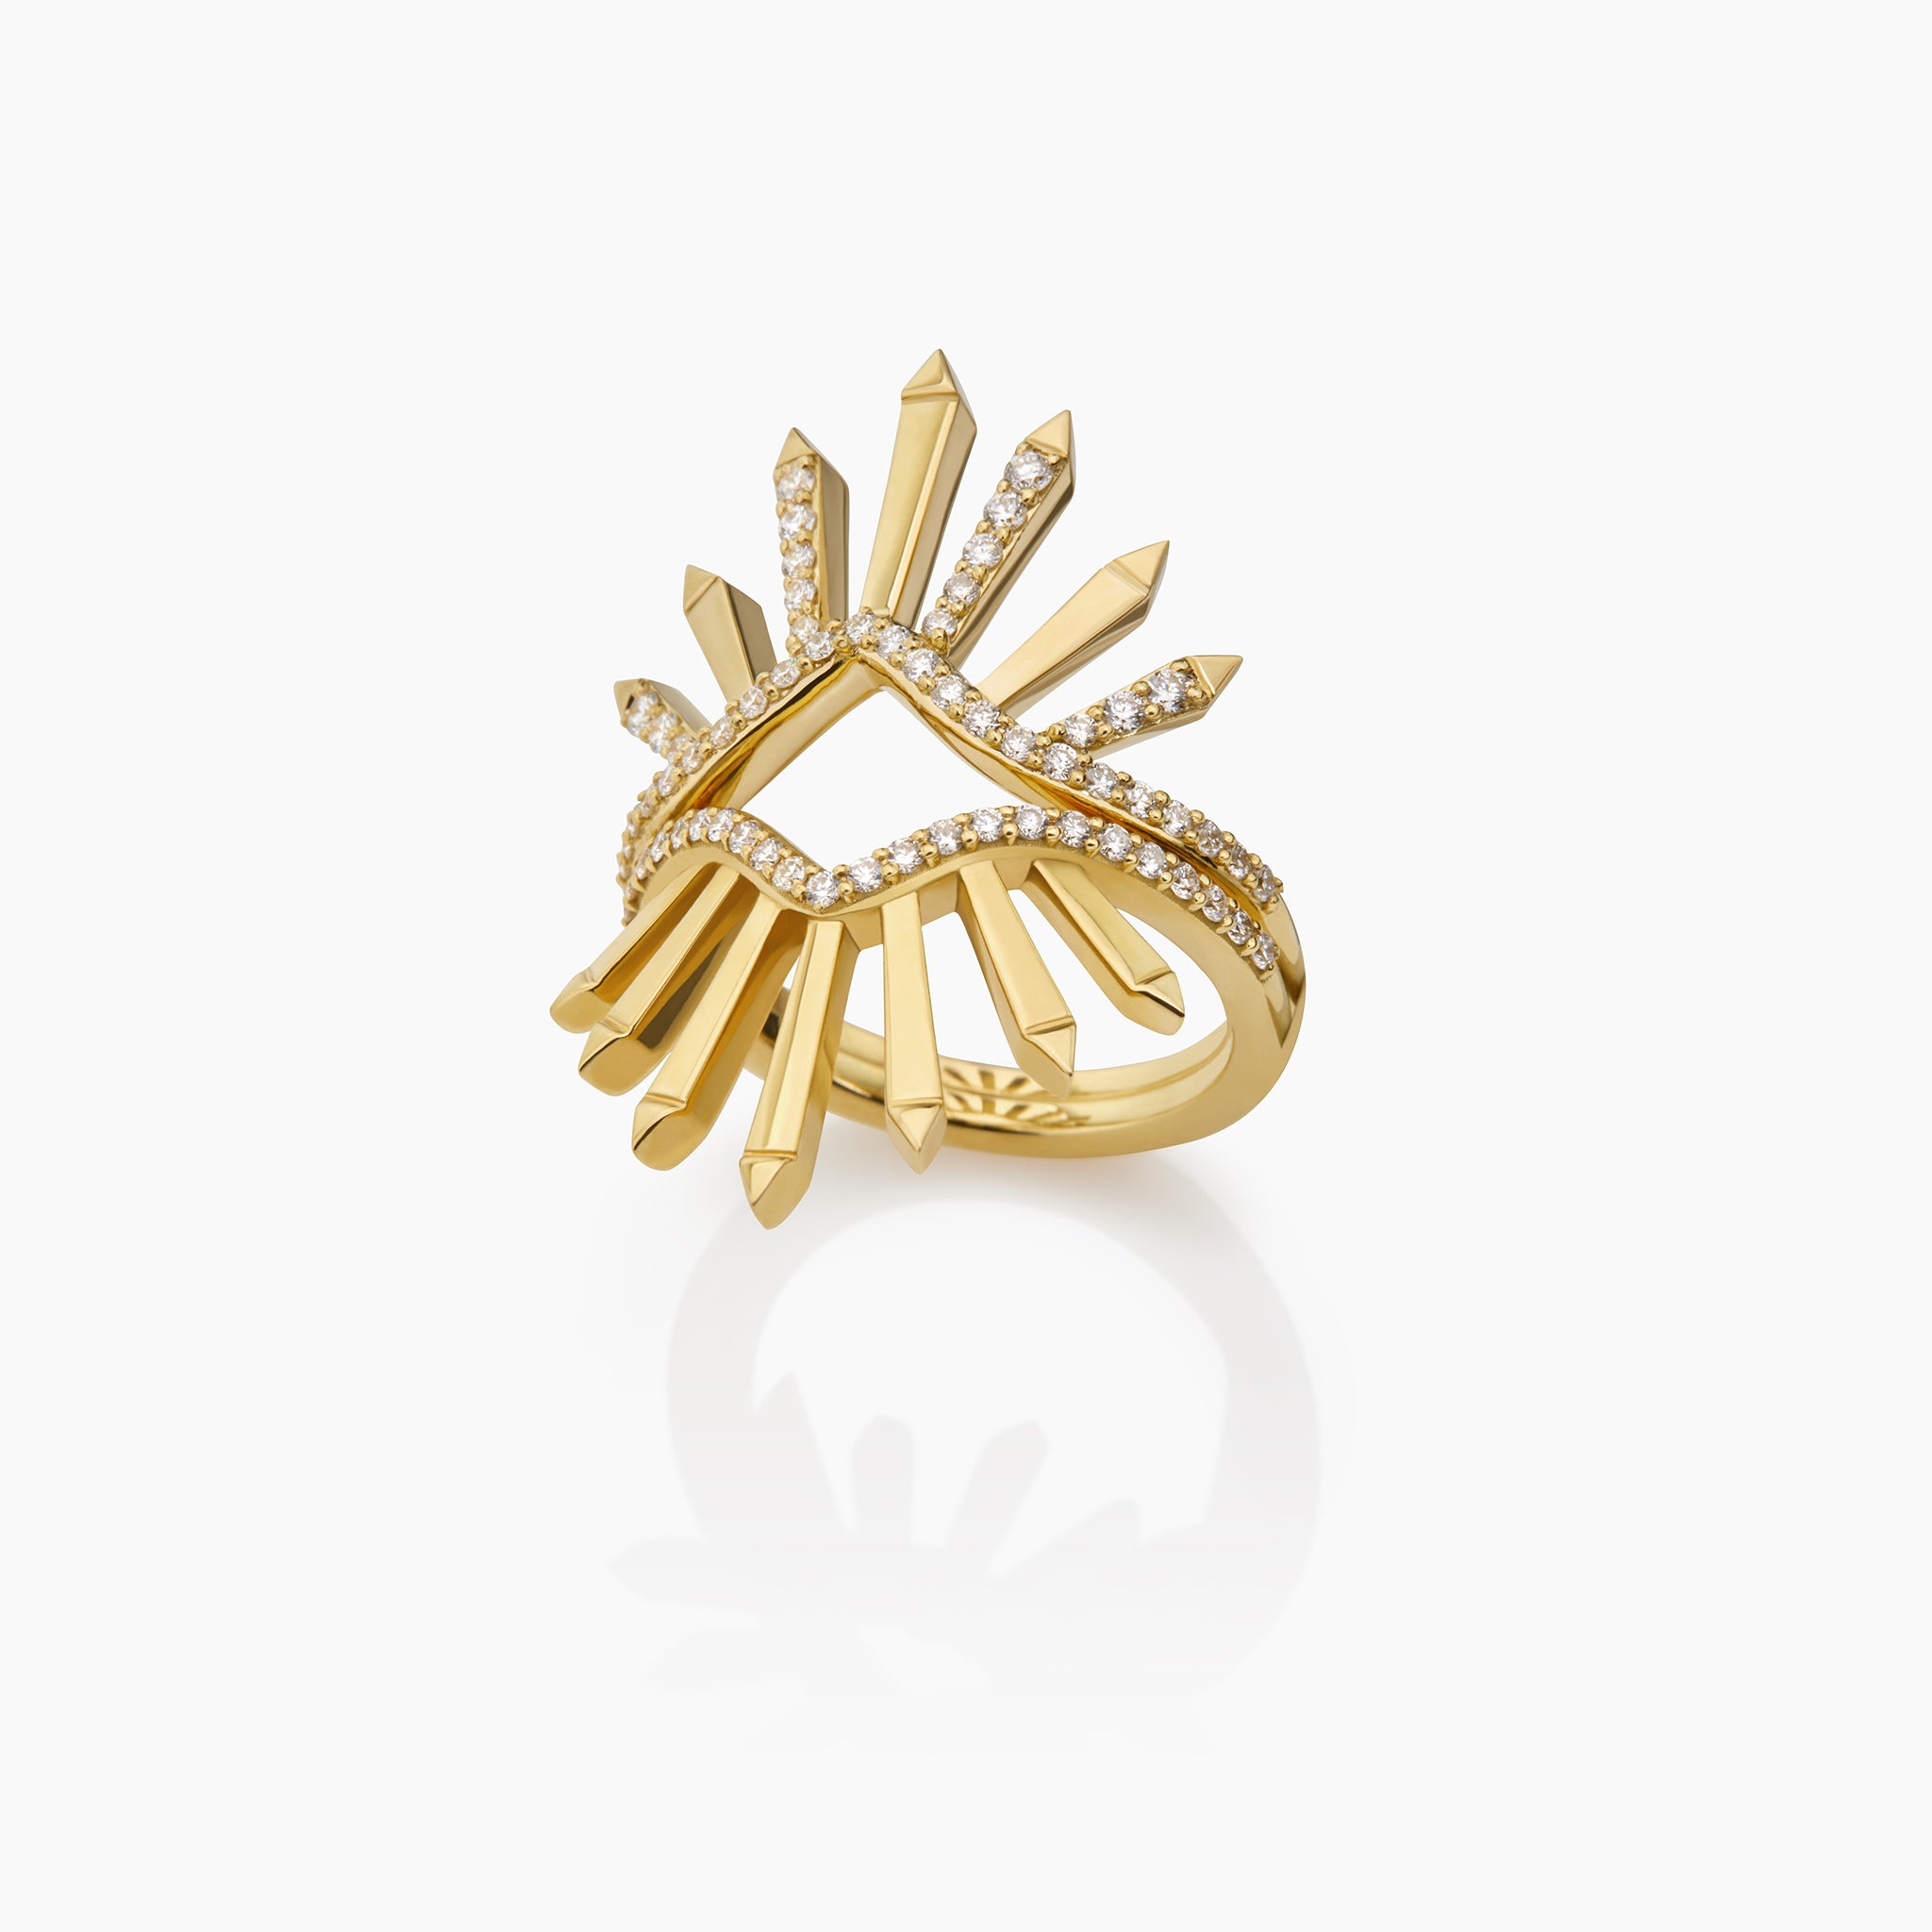 Yellow Gold Rings that can be worn together featuring radiant sunburst motifs adorned with diamonds, showcased against an off-white background.